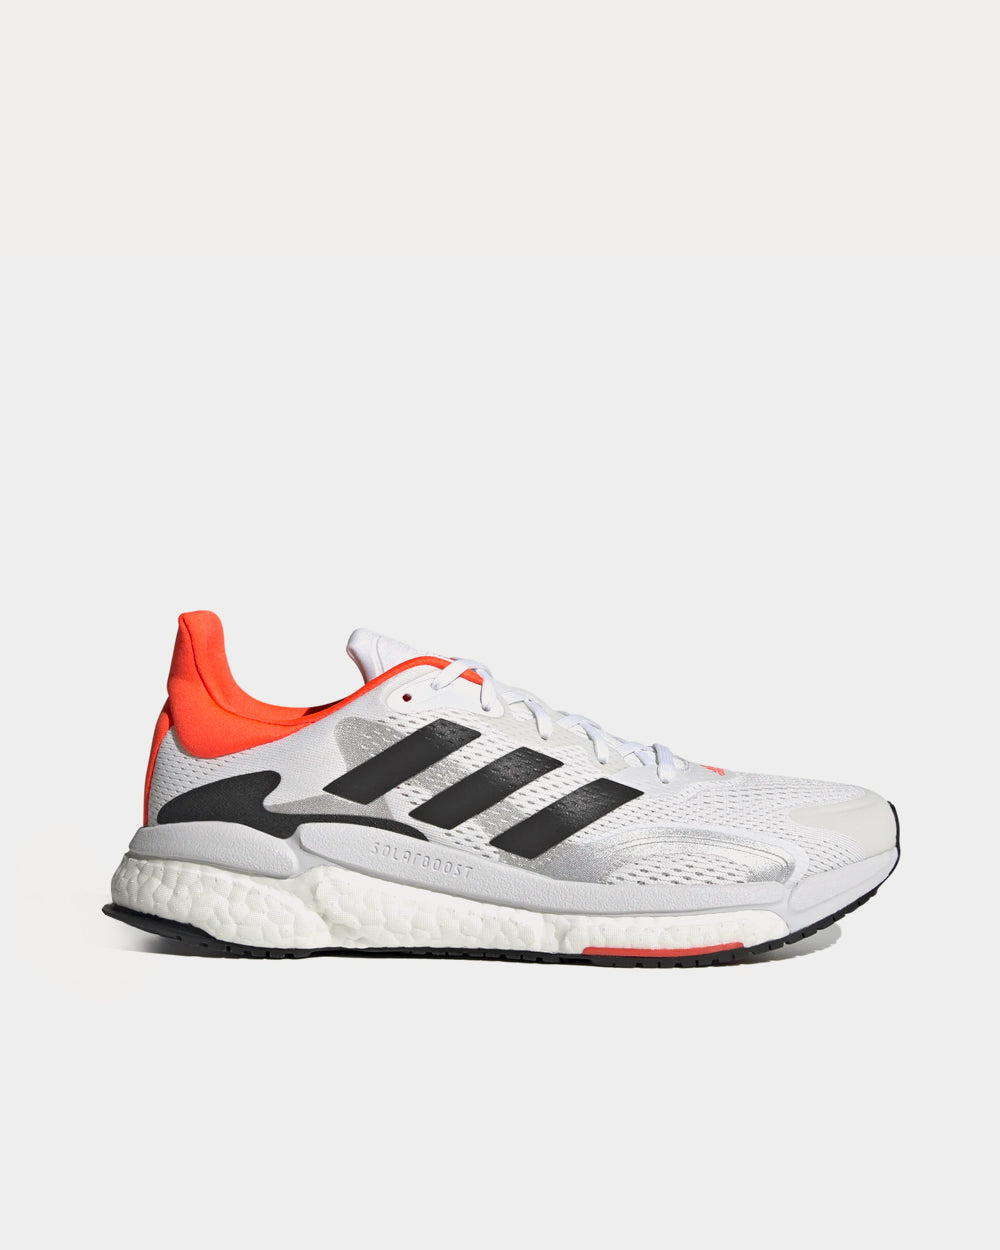 Adidas - Solarboost 3 Tokyo Cloud White / Core Black / Solar Red Running Shoes